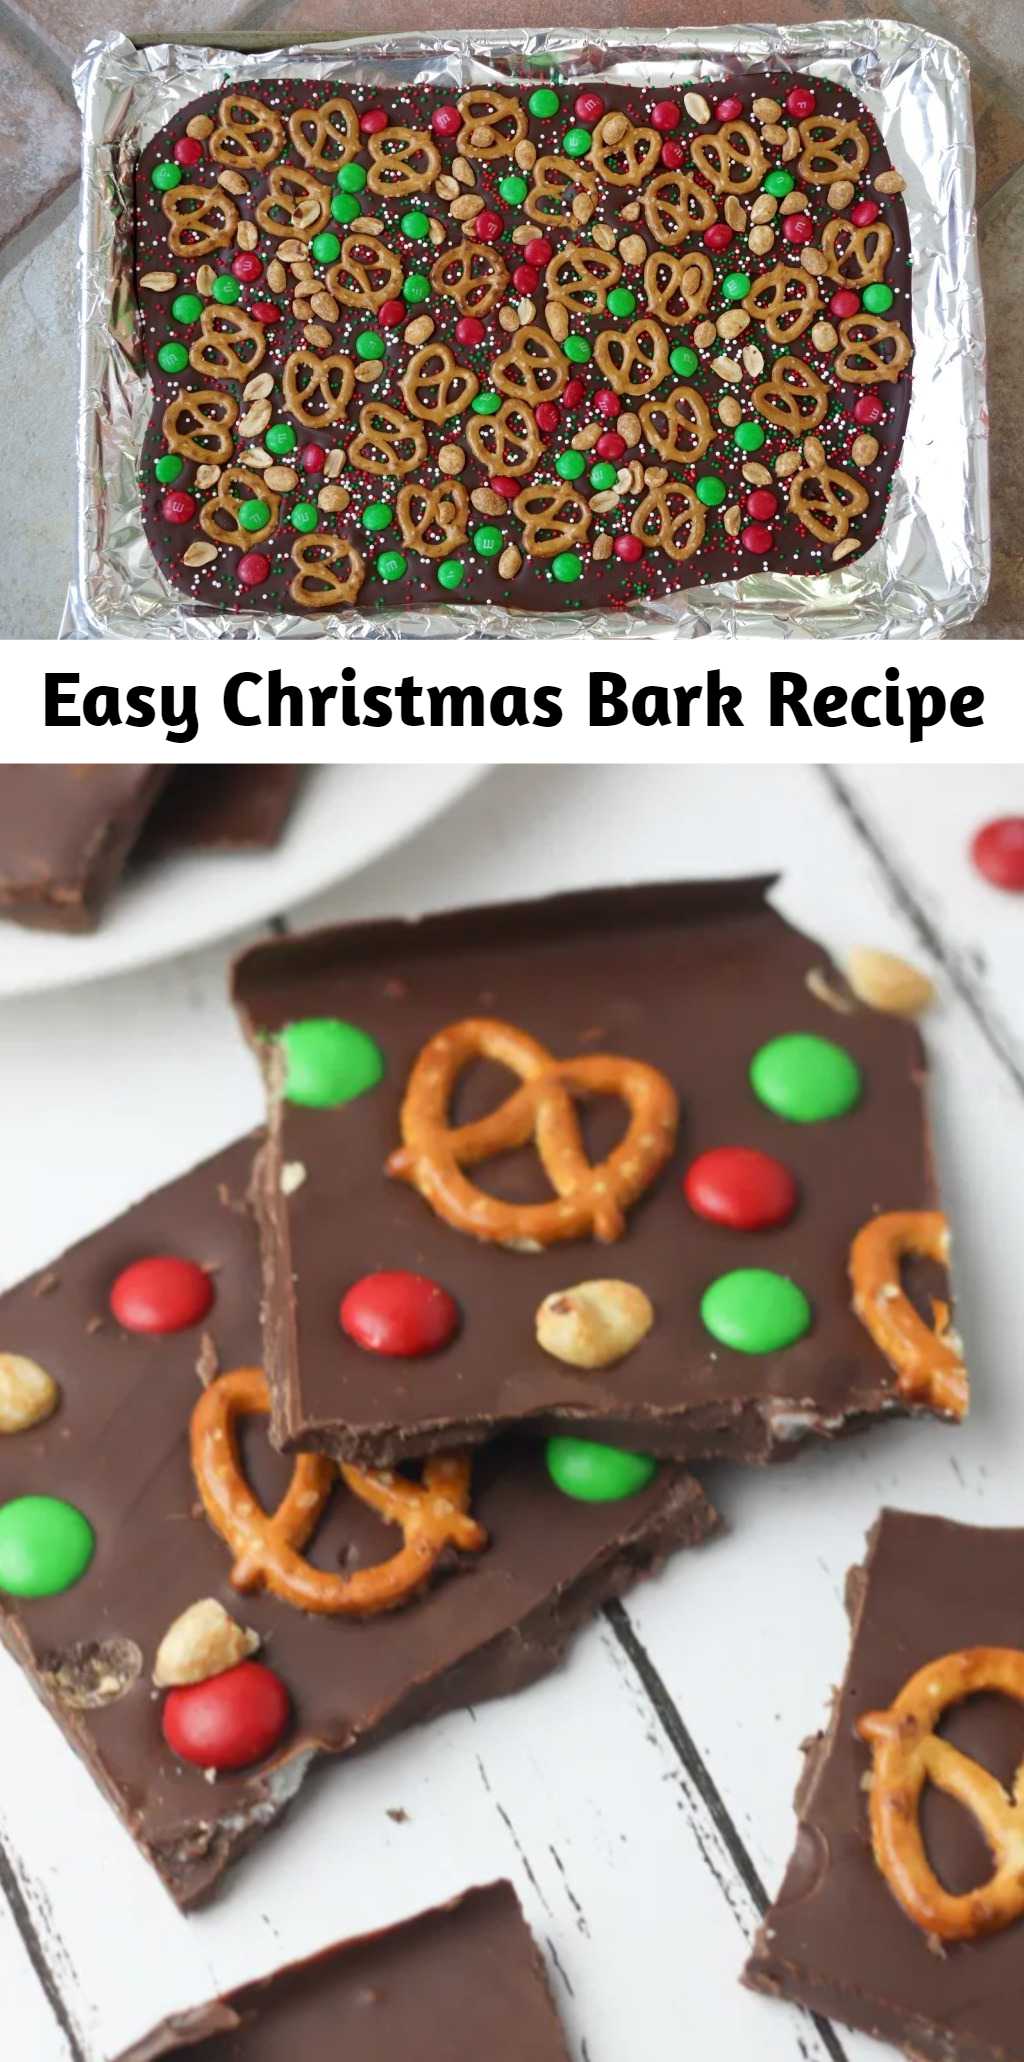 Easy Christmas Bark Recipe - Super easy and simple snack or dessert. This Easy Christmas Bark recipe is packed with salty pretzels and sweet chocolate candy. It’s incredibly simple to put together and makes a great holiday treat or gift to give to any family member, neighbor or friend.